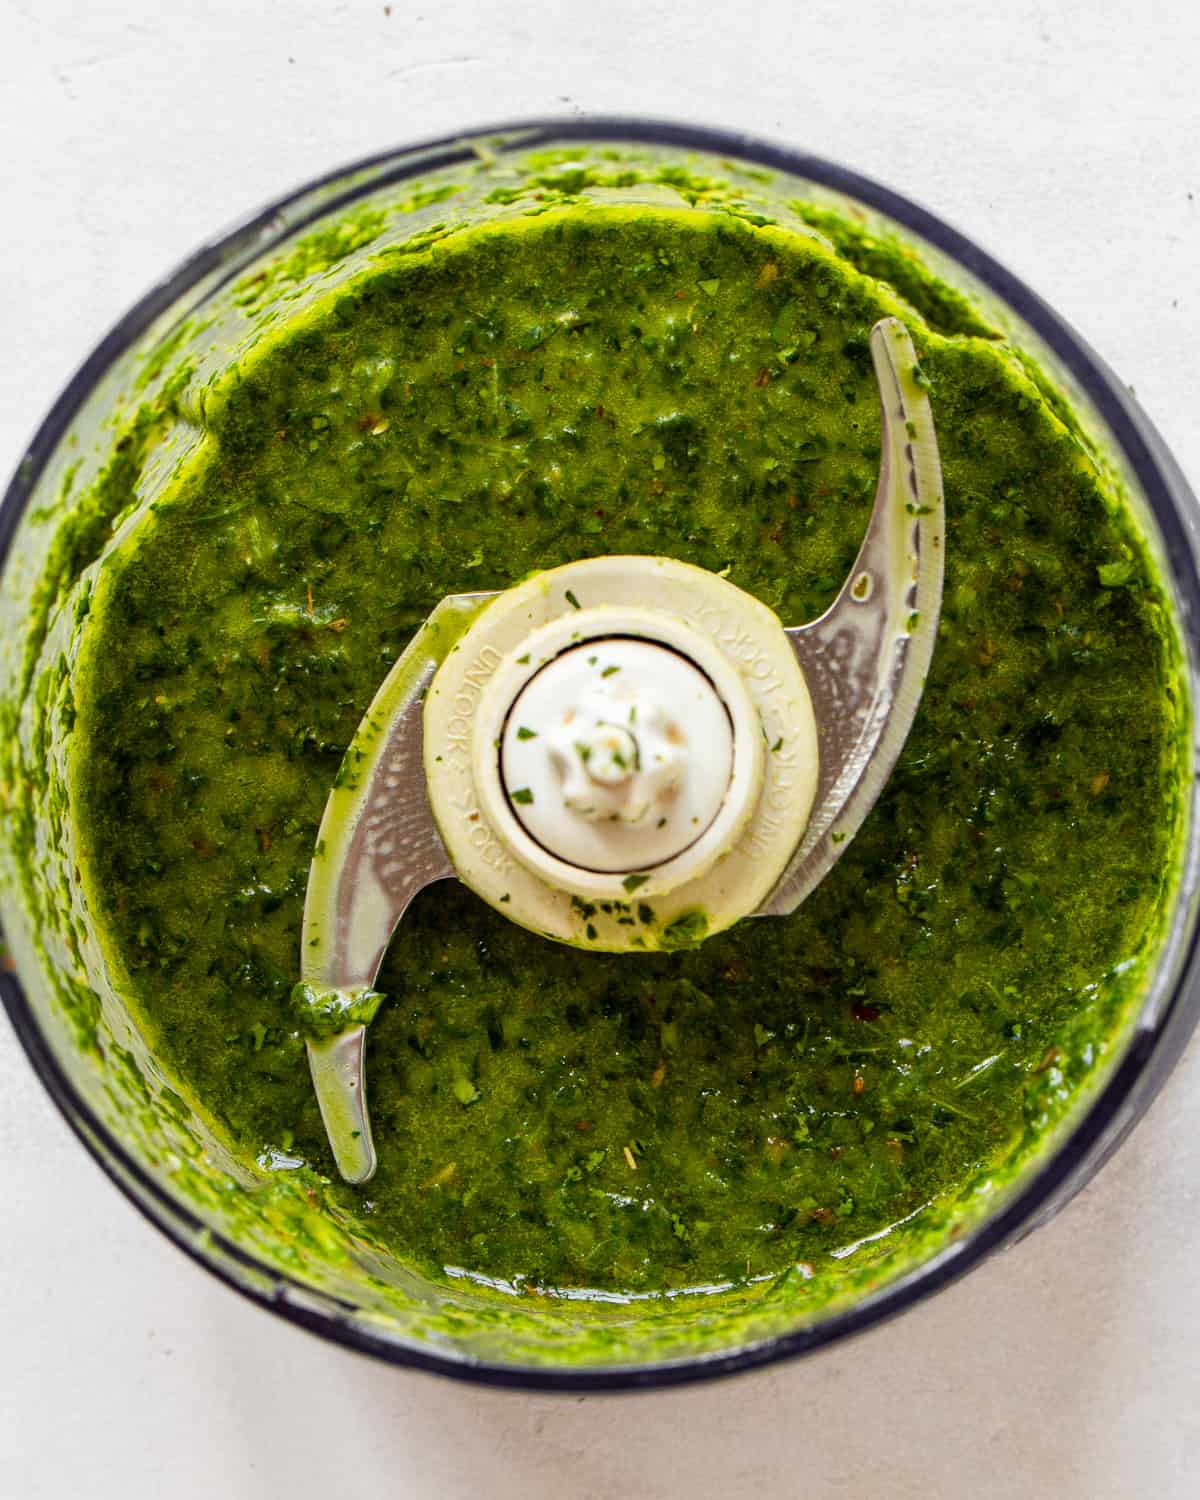 Blended chimichurri in a small food processor.